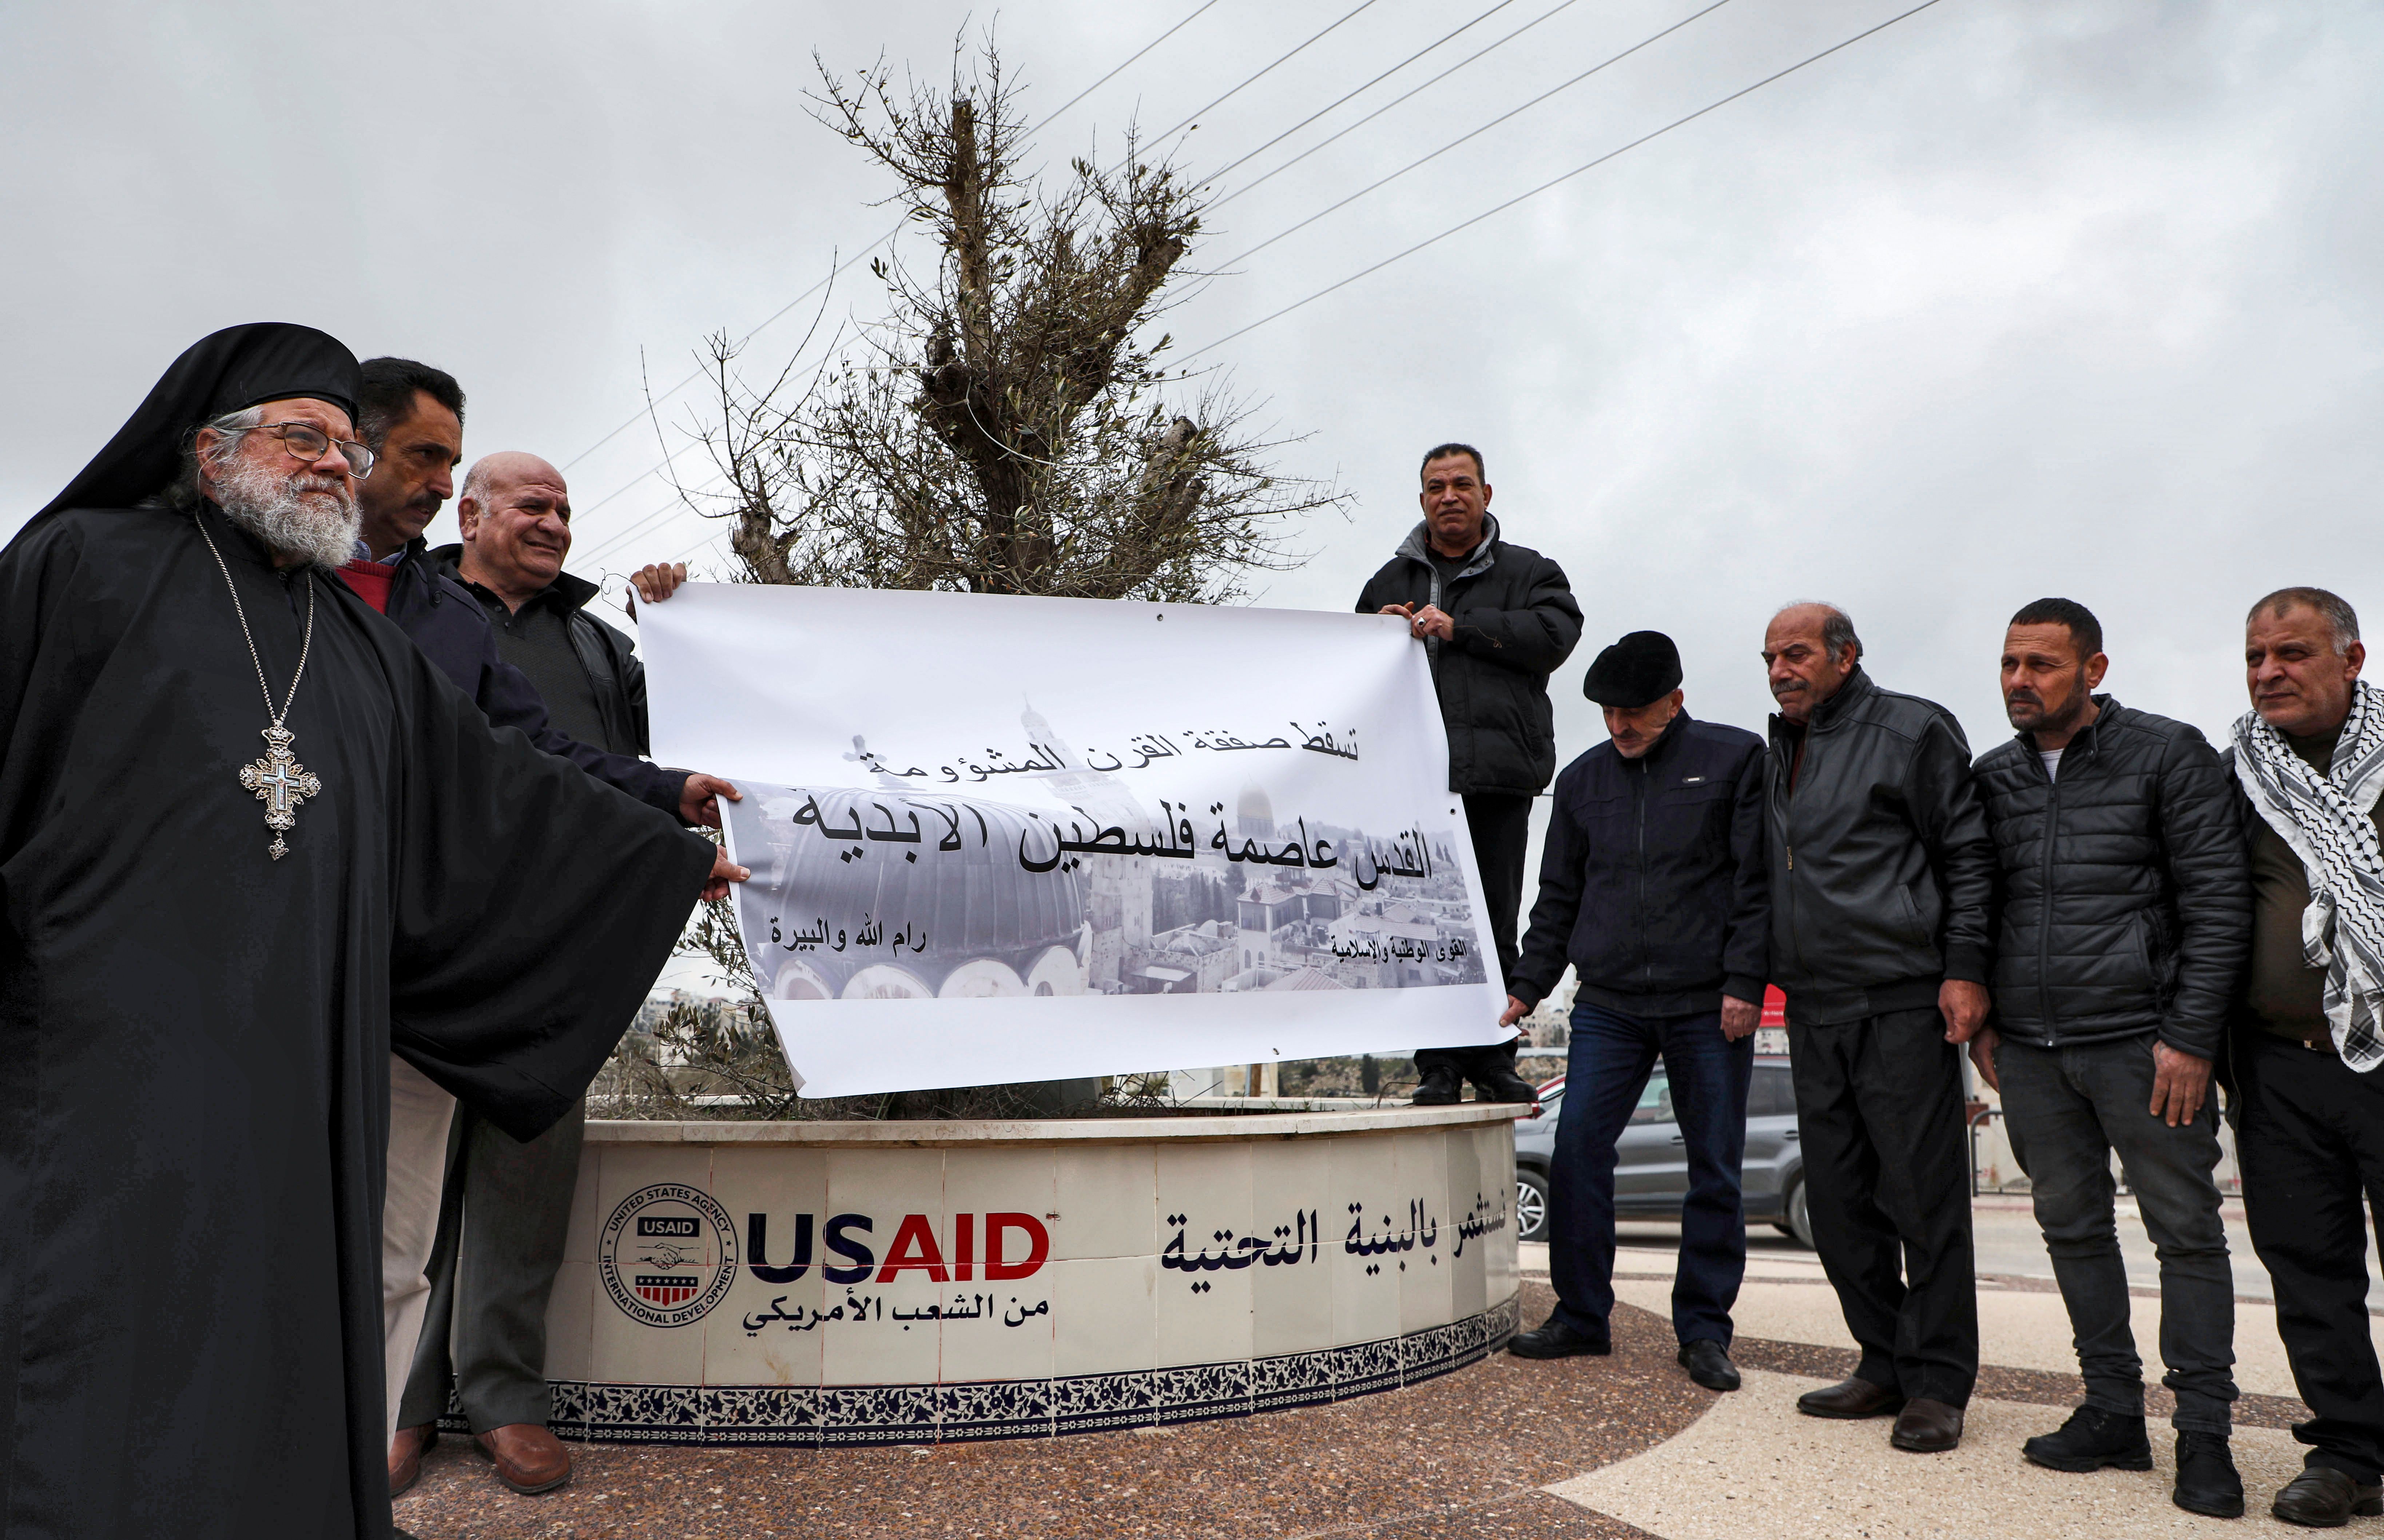 Archimandrite Abdullah Yulio (L), parish priest of the Melkite Greek Catholic church in Ramallah, stands with Palestinian protesters during a demonstration against U.S. President Donald Trump’s Middle East peace plan, in Ramallah on Feb. 4, 2020.